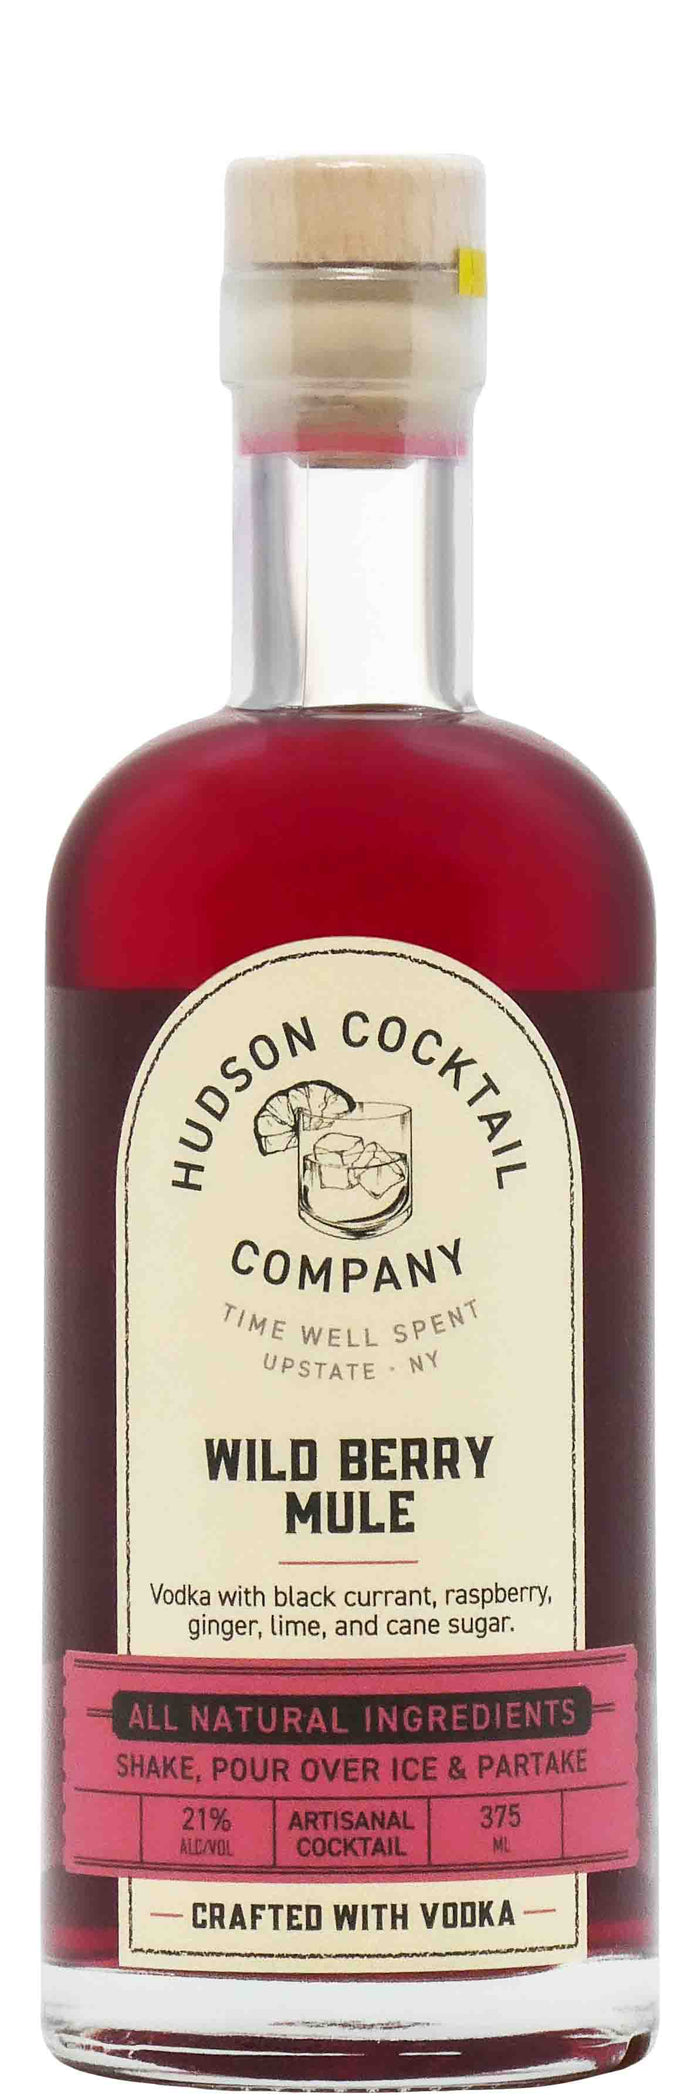 Hudson Cocktail Co. Wild Berry Mule